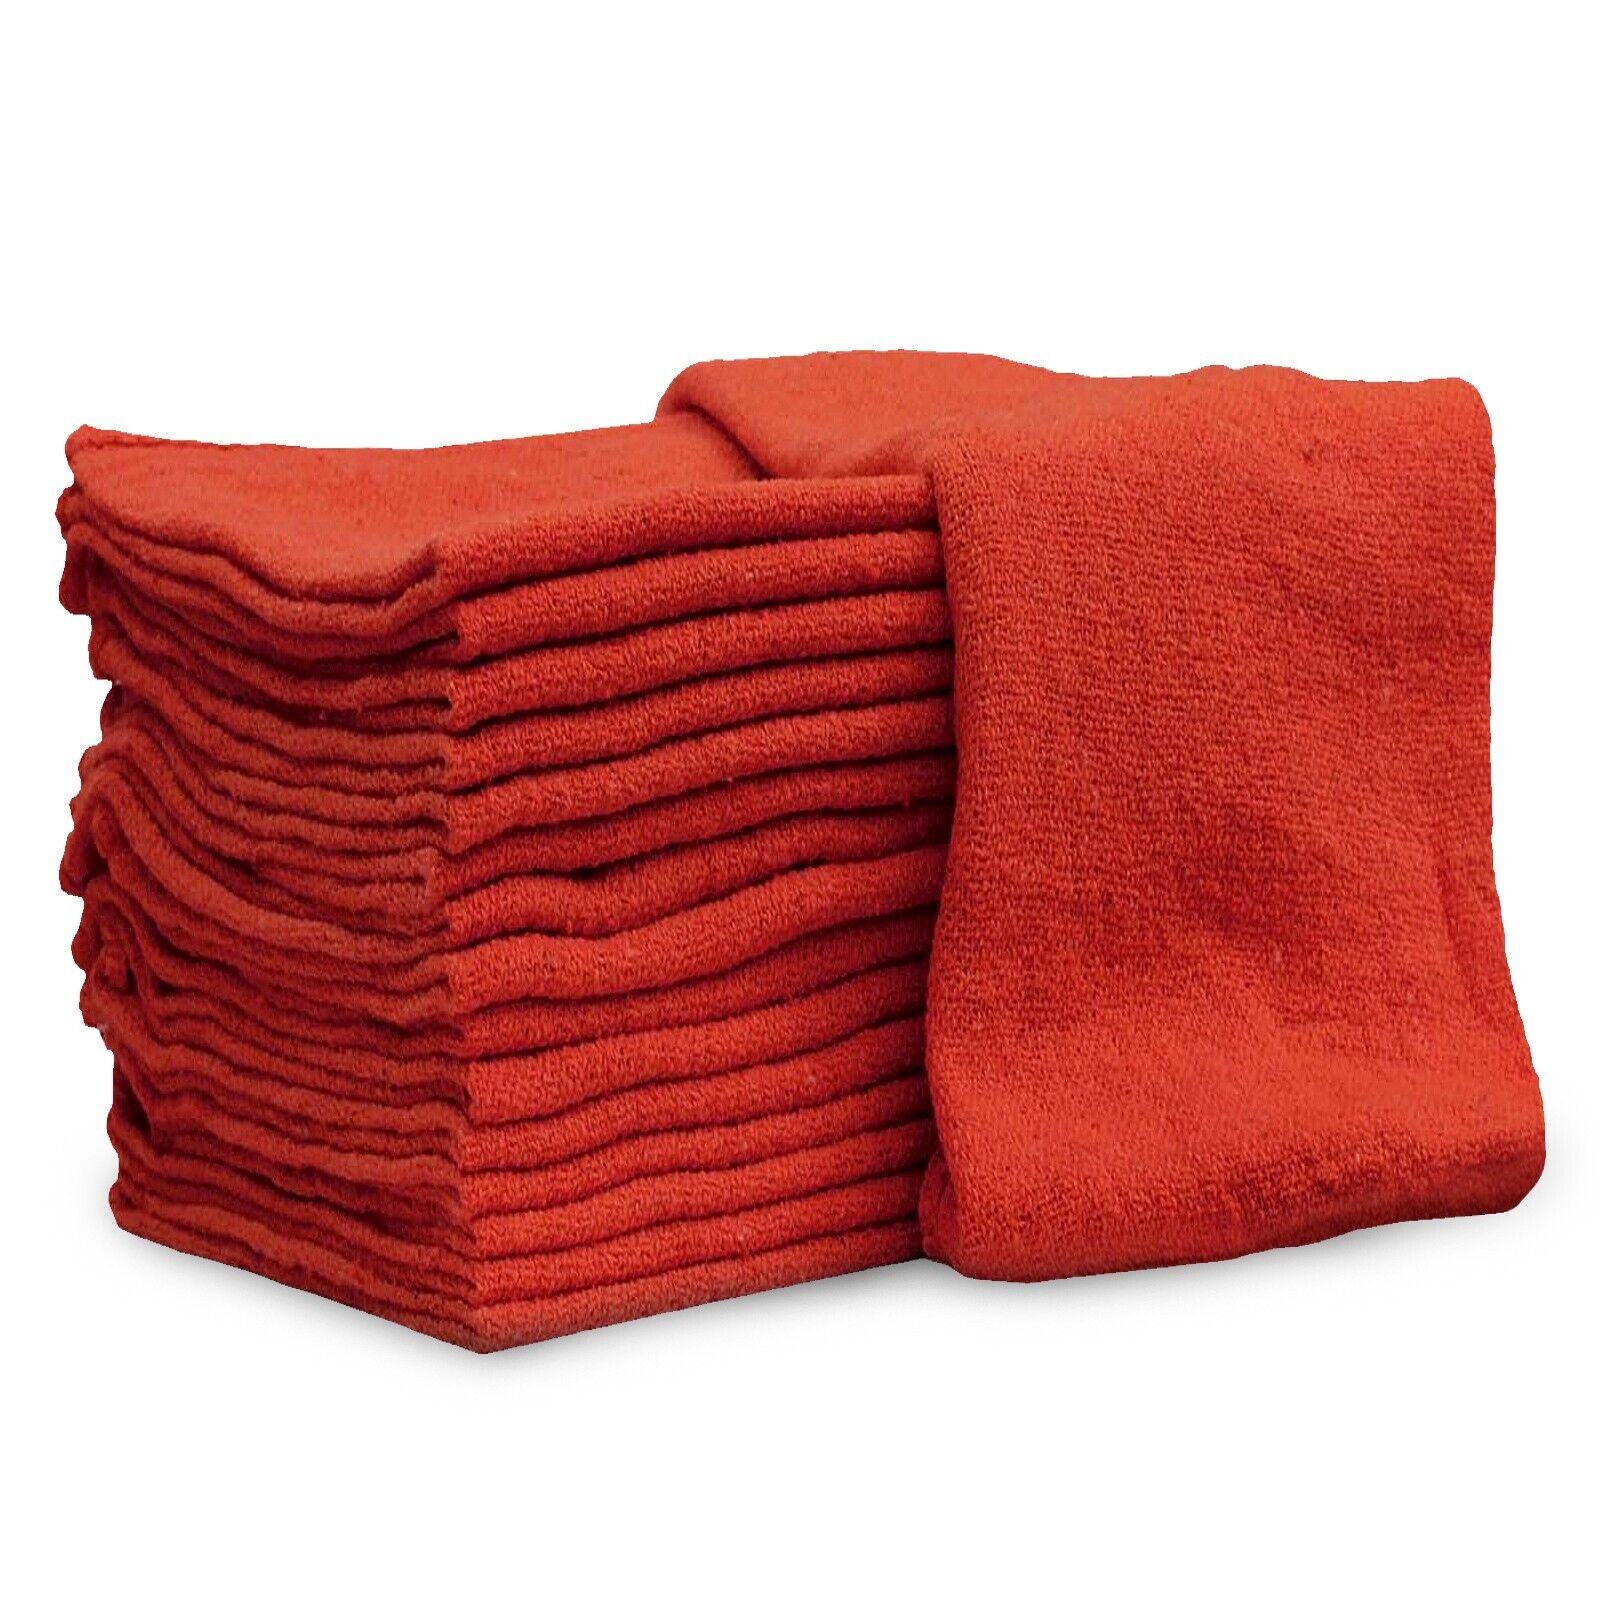 500 New Industrial A Grade Shop Towels-Cleaning Towels Red - Multipurpose Cloth